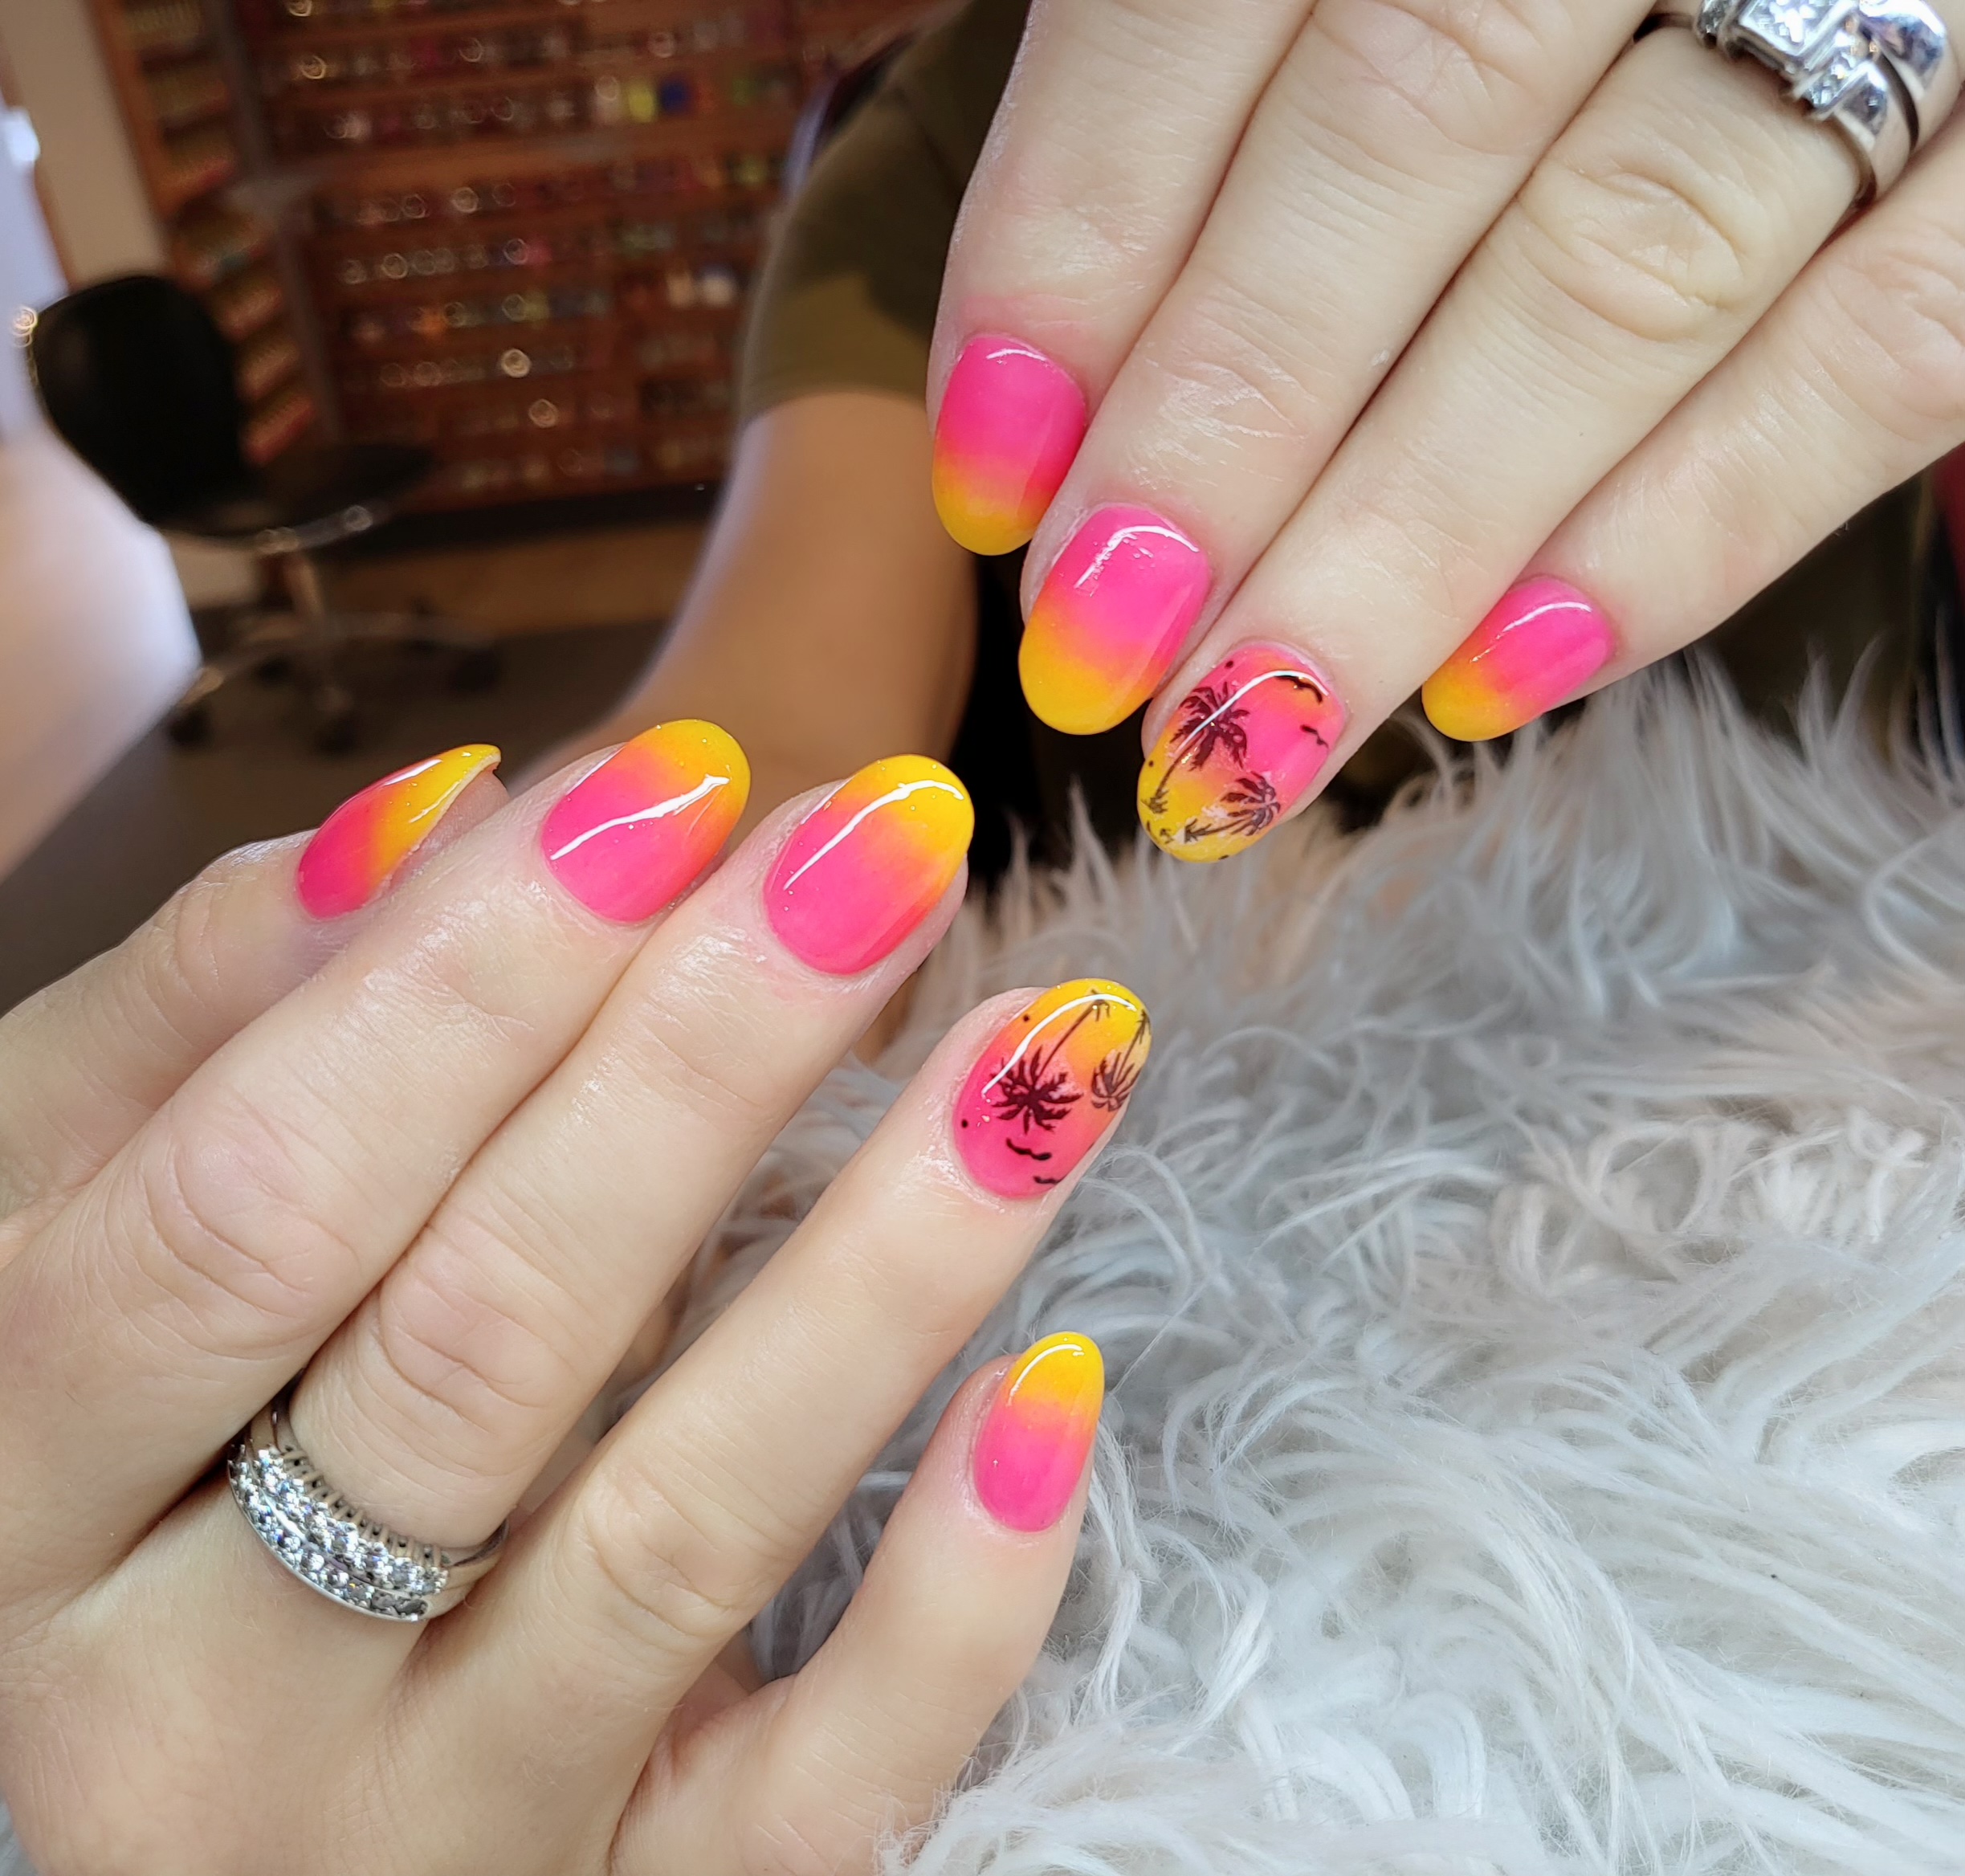 WIN a manicure and pedicure with your bestie at The Nail Bar Beauty & Co !